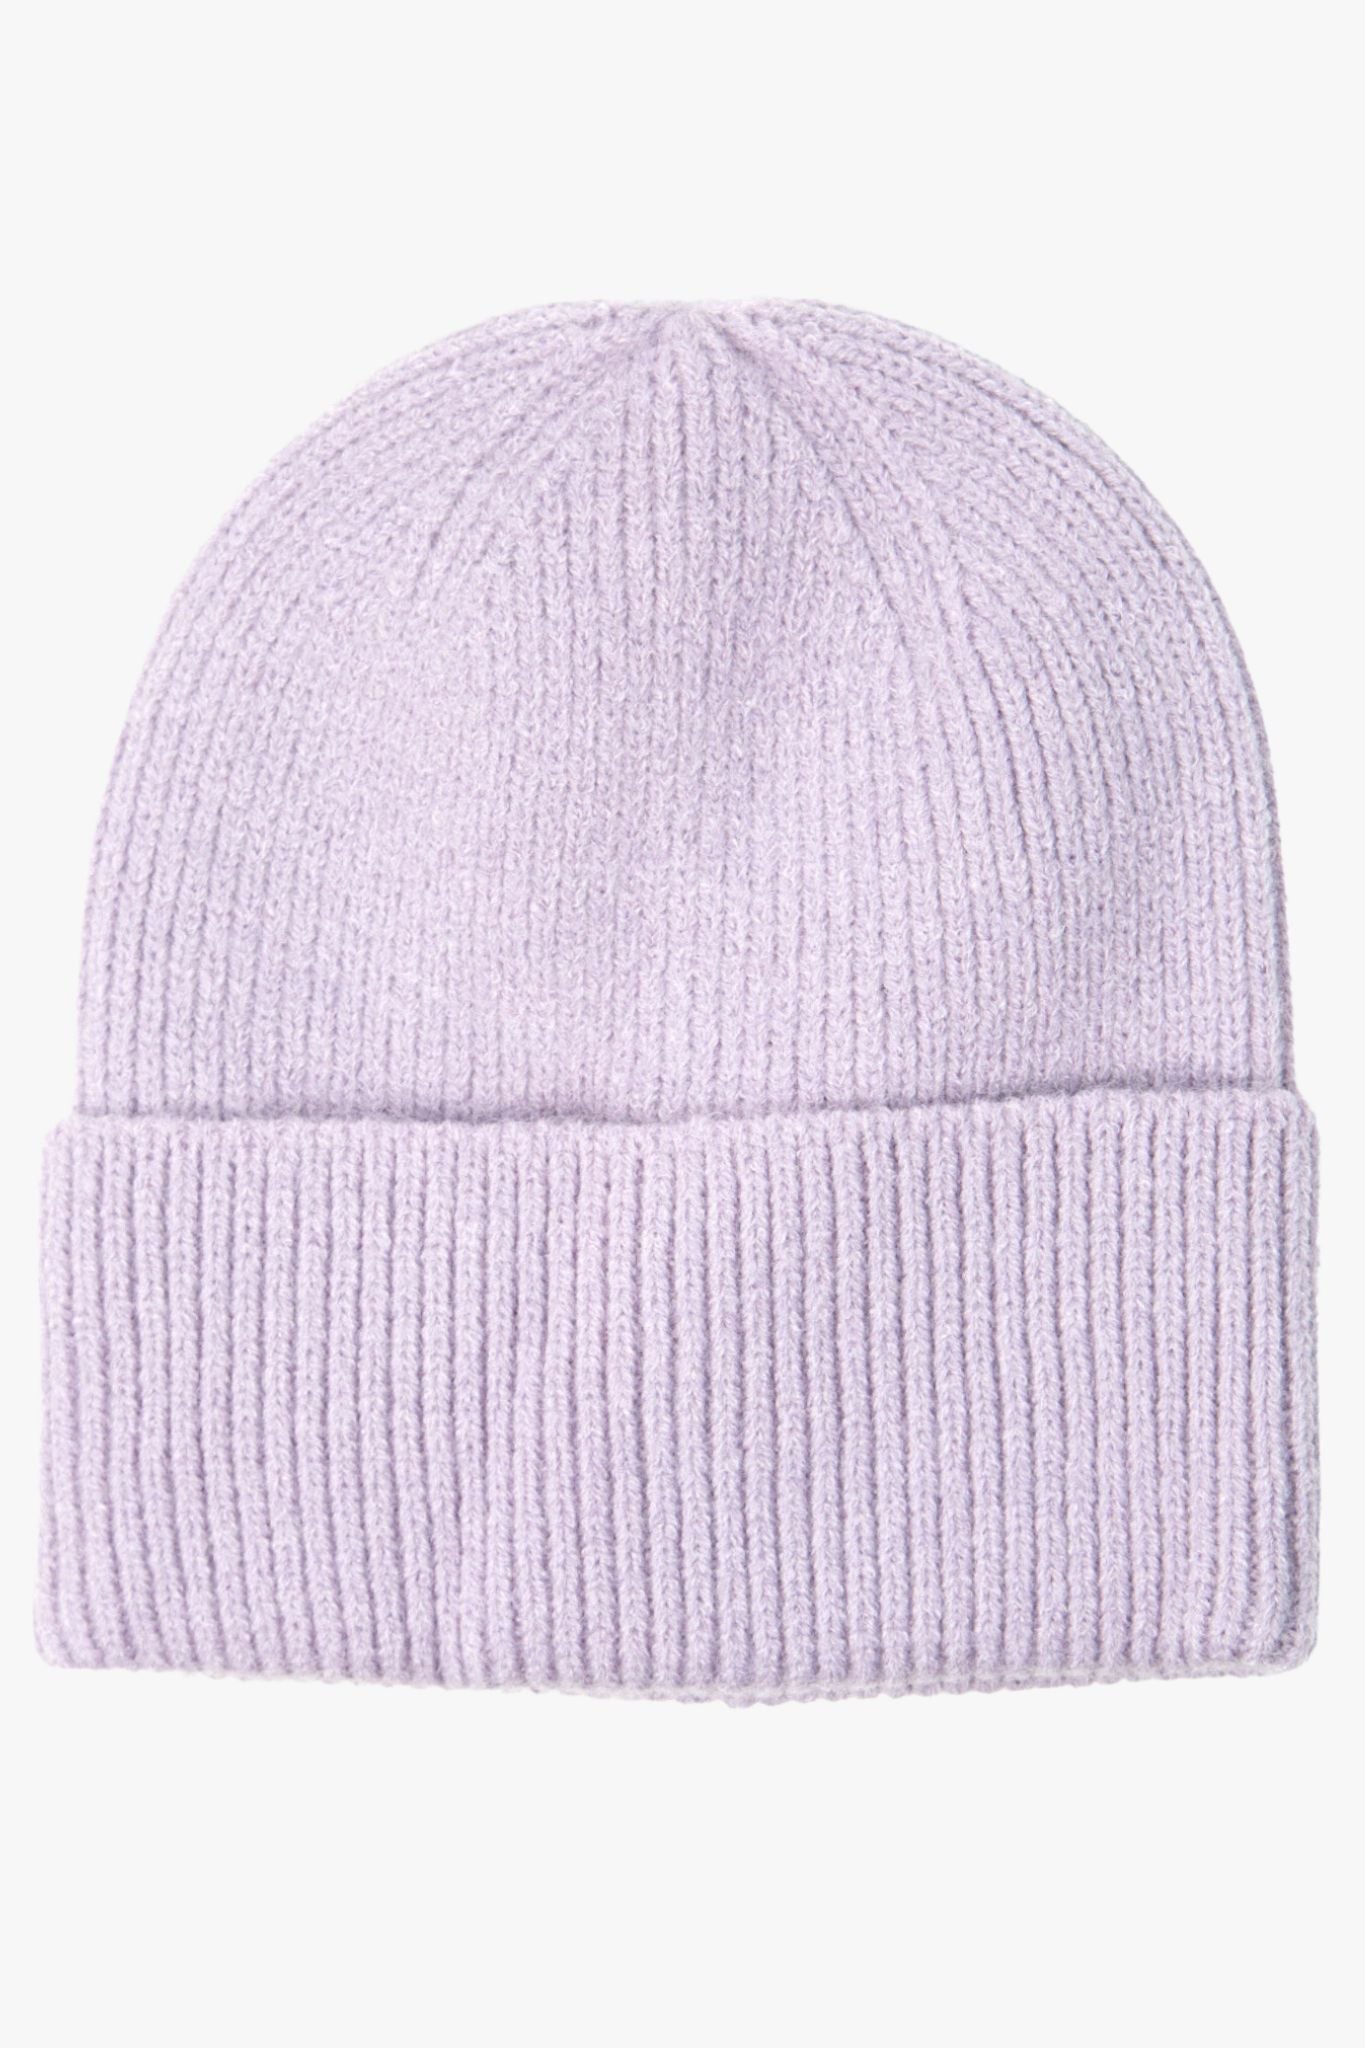 lilac knitted beanie hat 